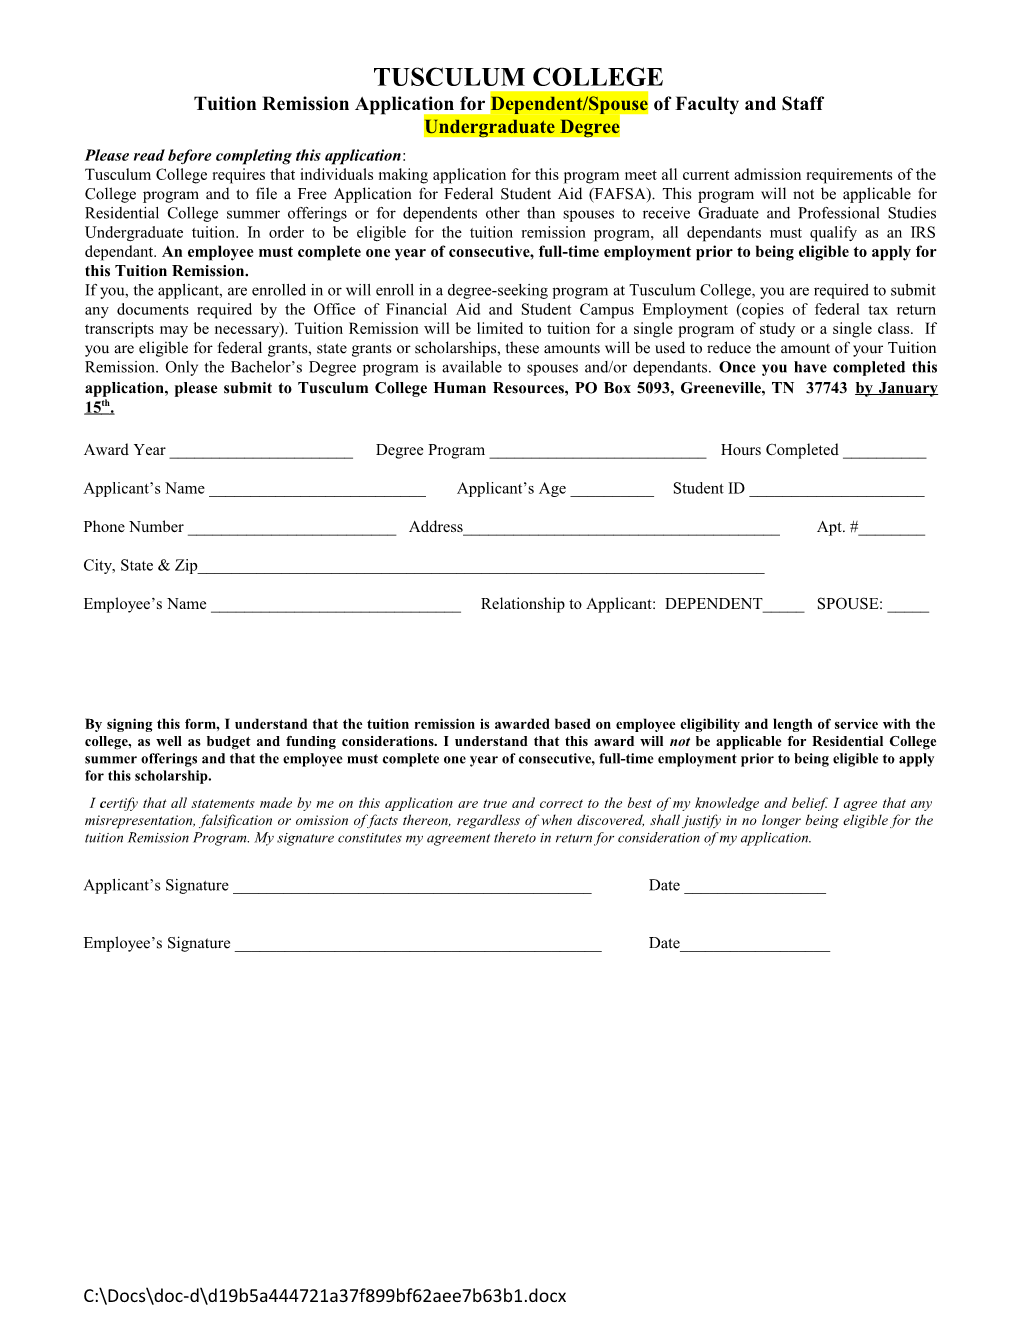 Tusculum College Tuition Scholarship Application